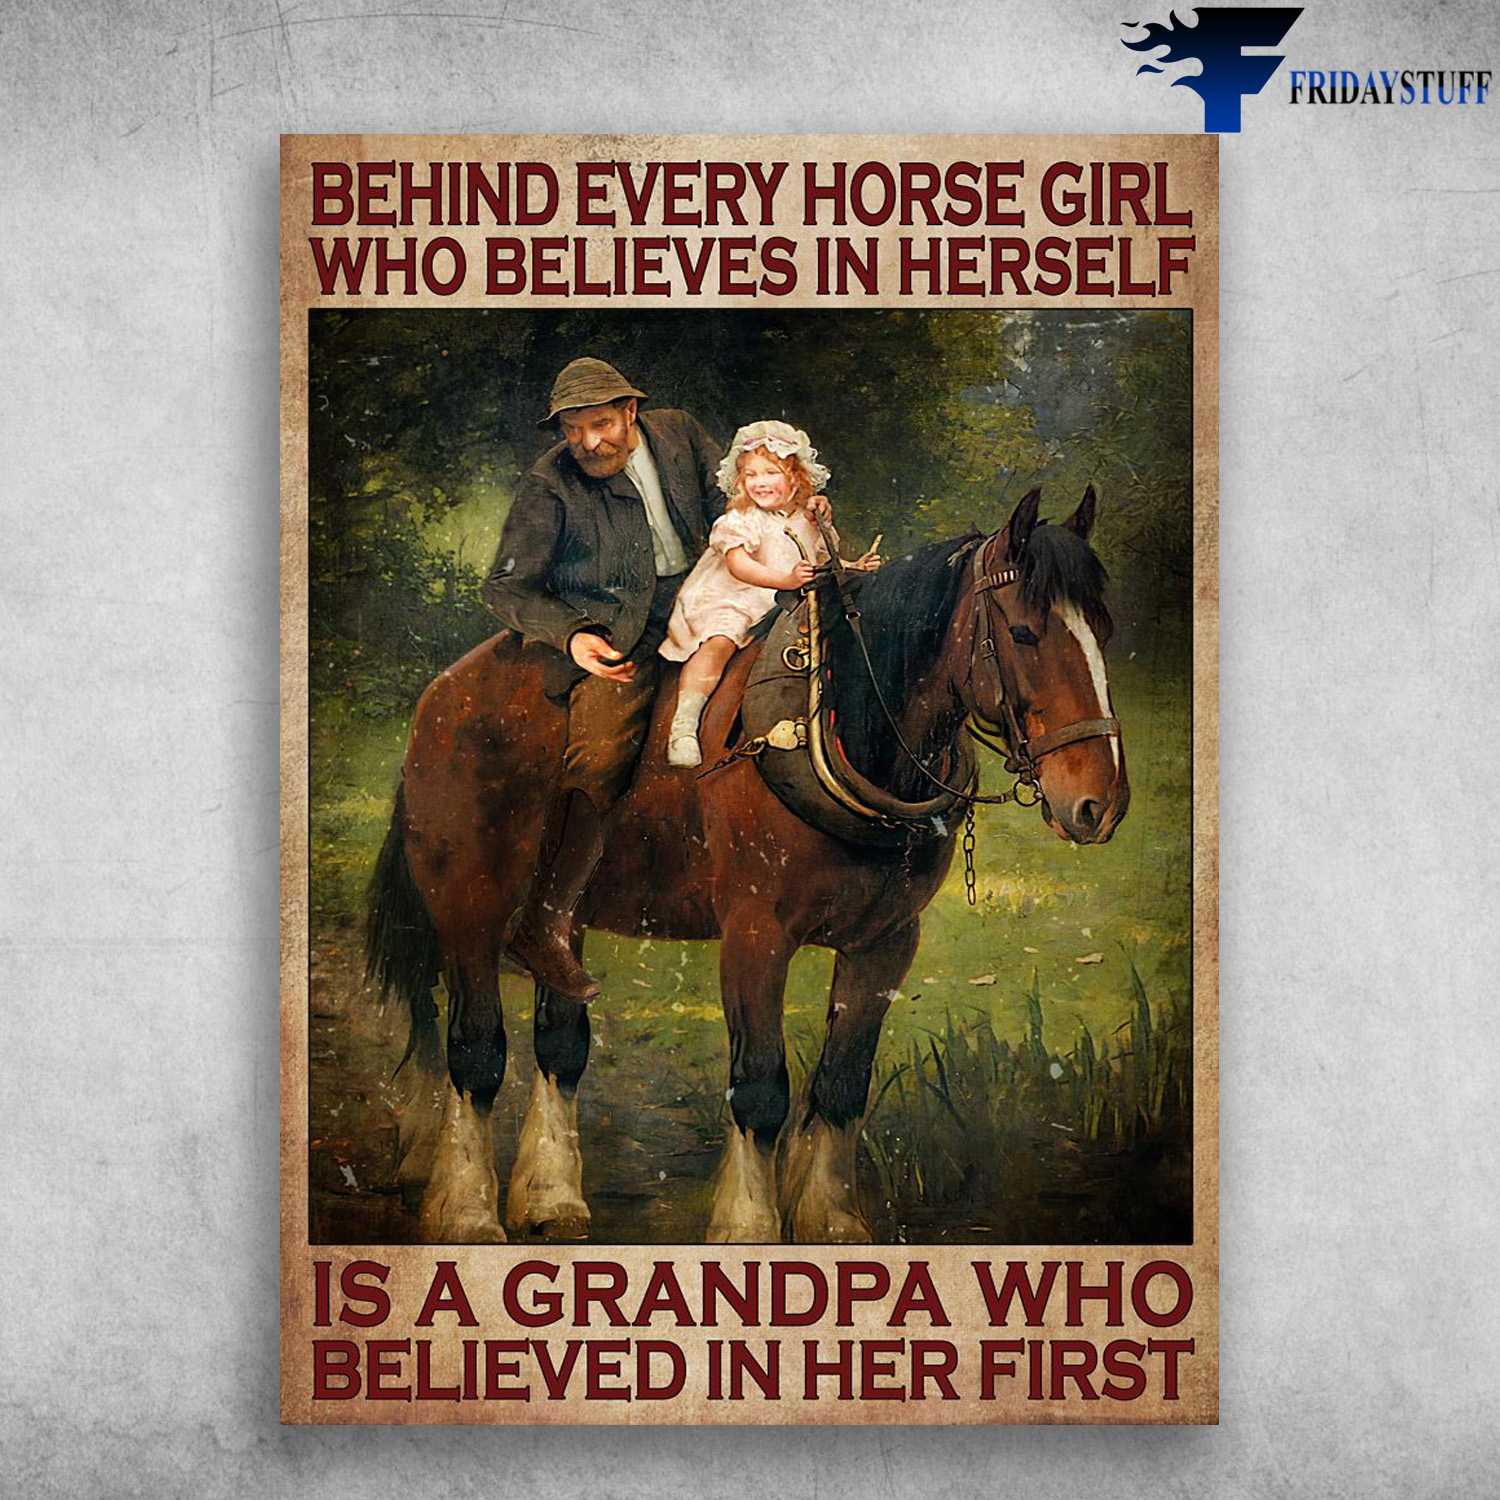 Grandpa Granddaughter, Old Man Riding - Behind Every Horse Girl, Who Believes In Herself, Is A Grandpa Who, Believed In Her First